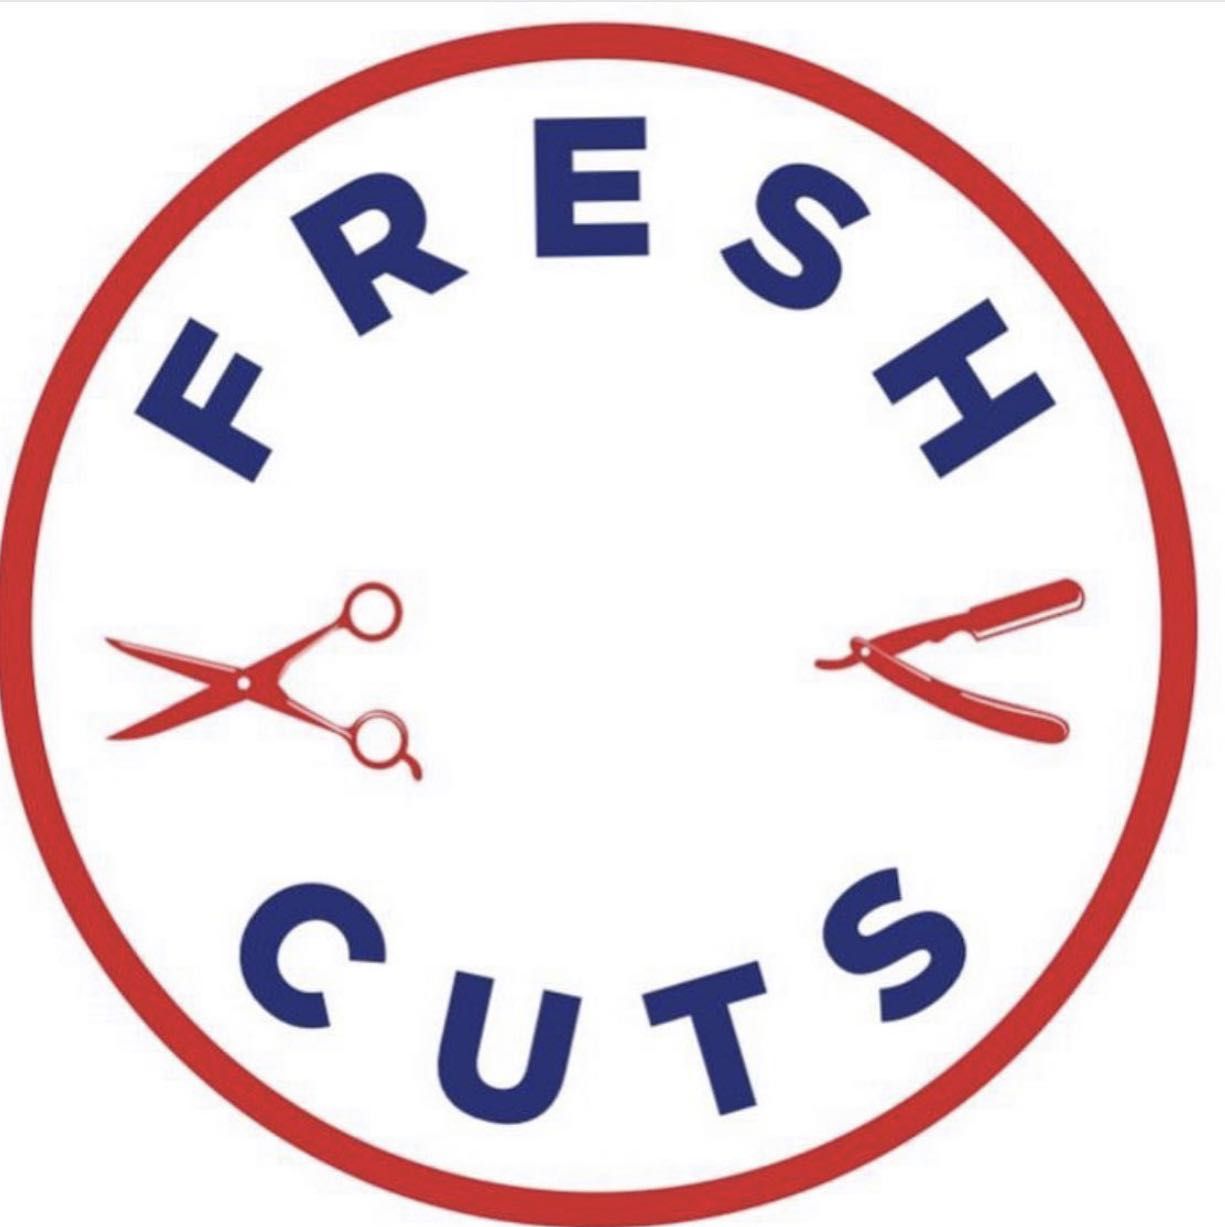 Fresh Cuts Vancouver, 422 W 8th Ave, V5Y 1N9, Vancouver